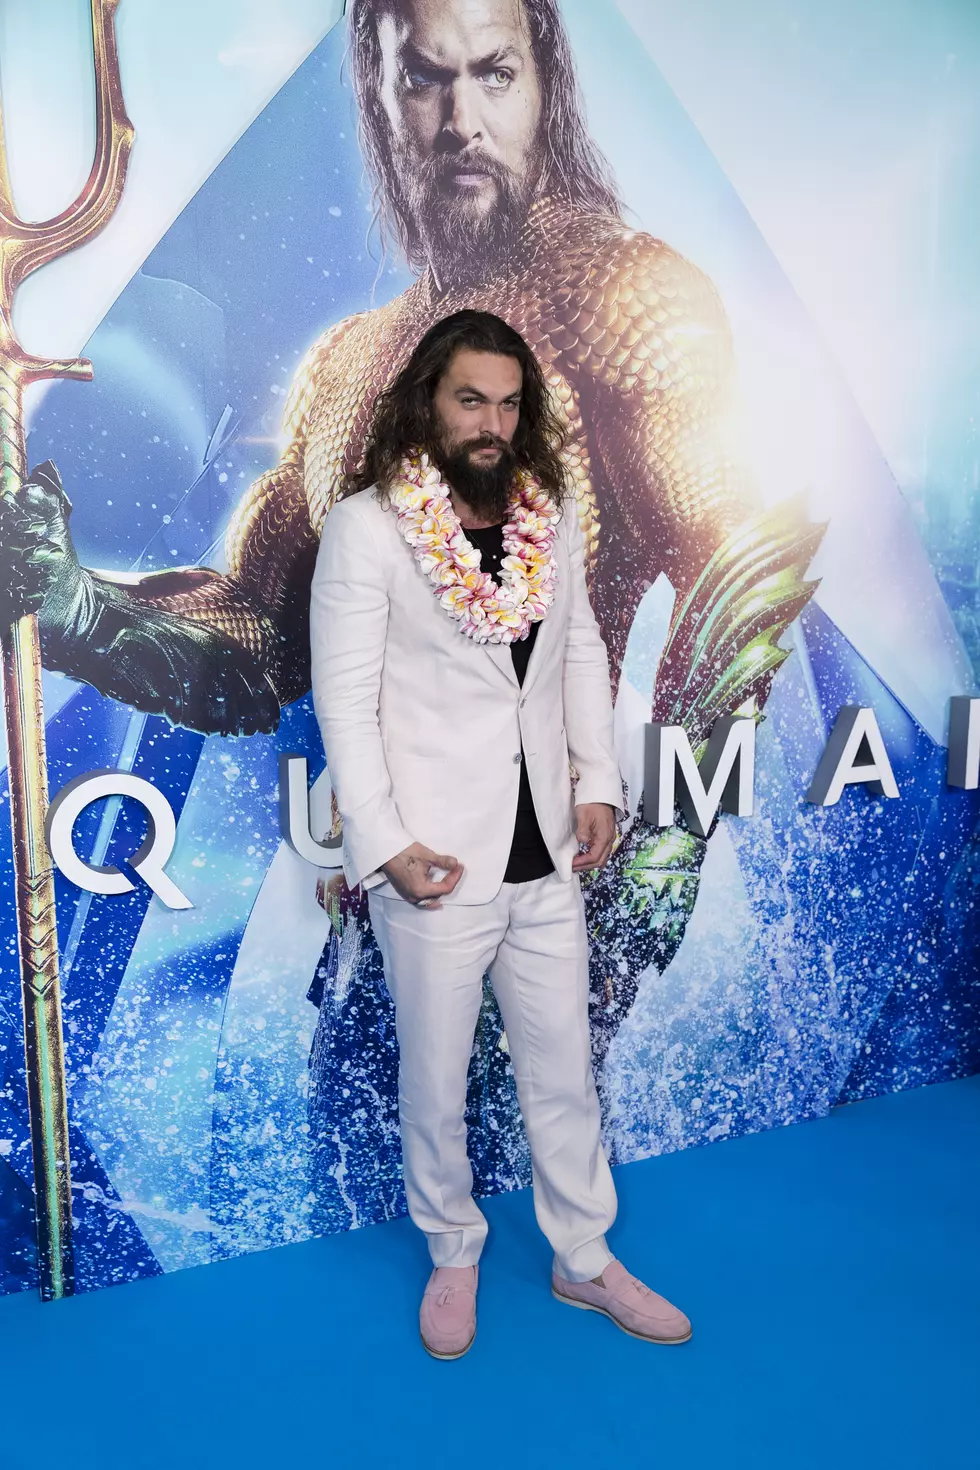 Aquaman, Another DC Comic Turned Movie Fail